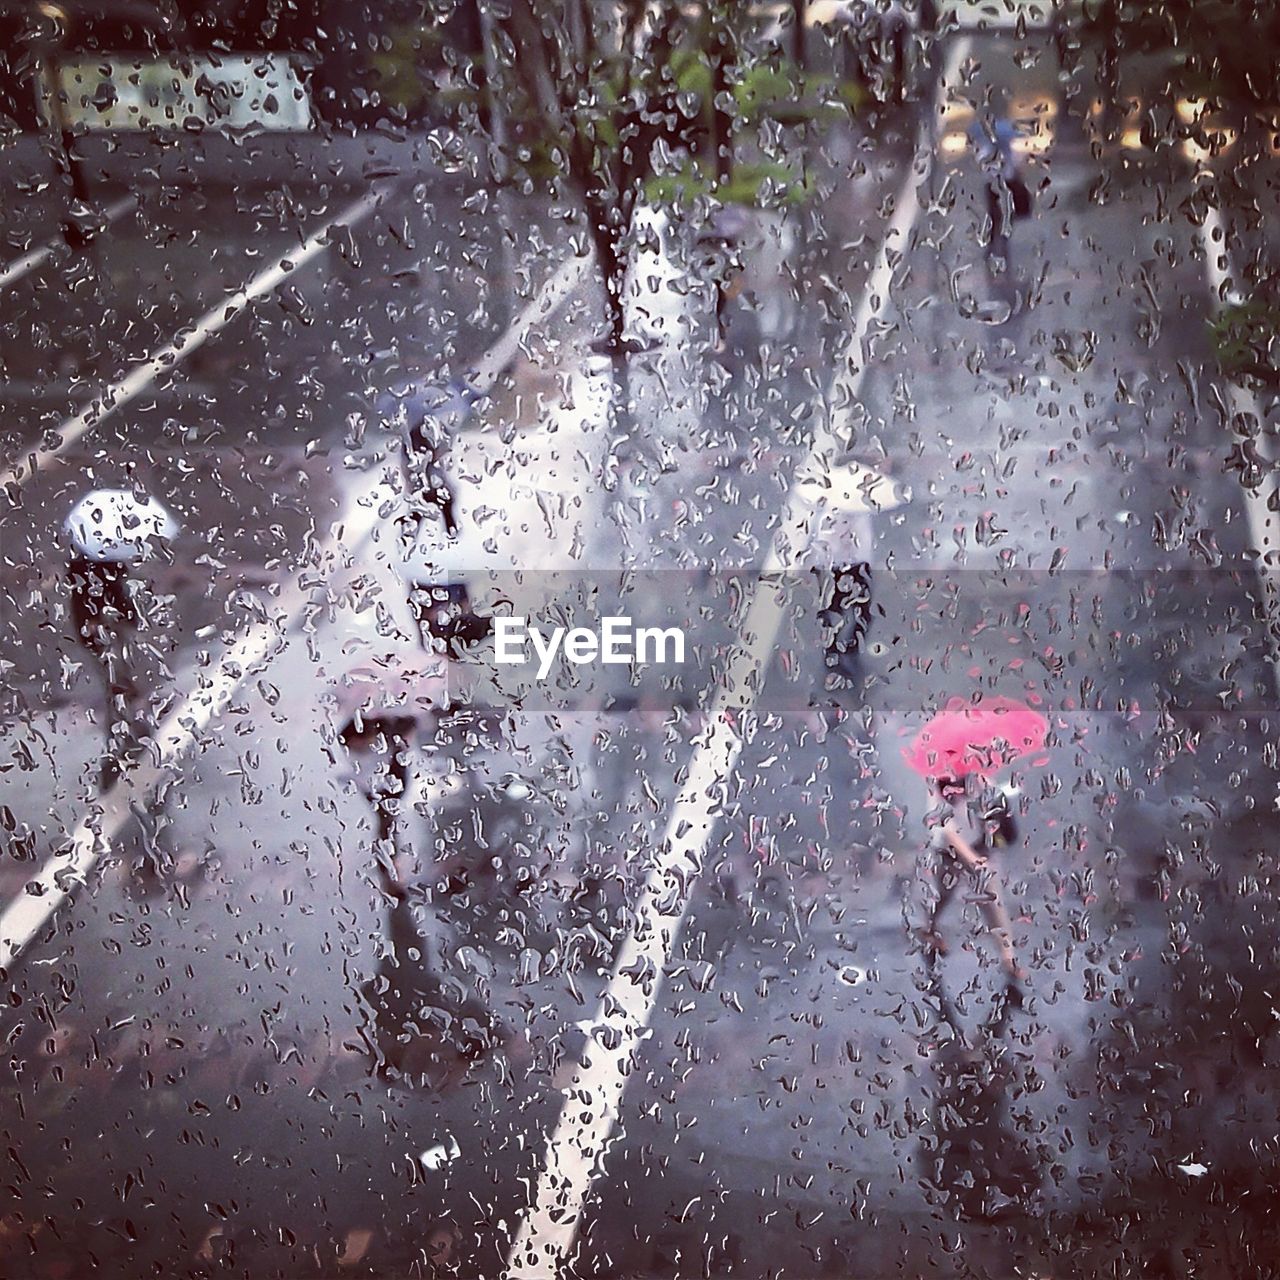 Waterdrops on glass against people walking with umbrellas on road